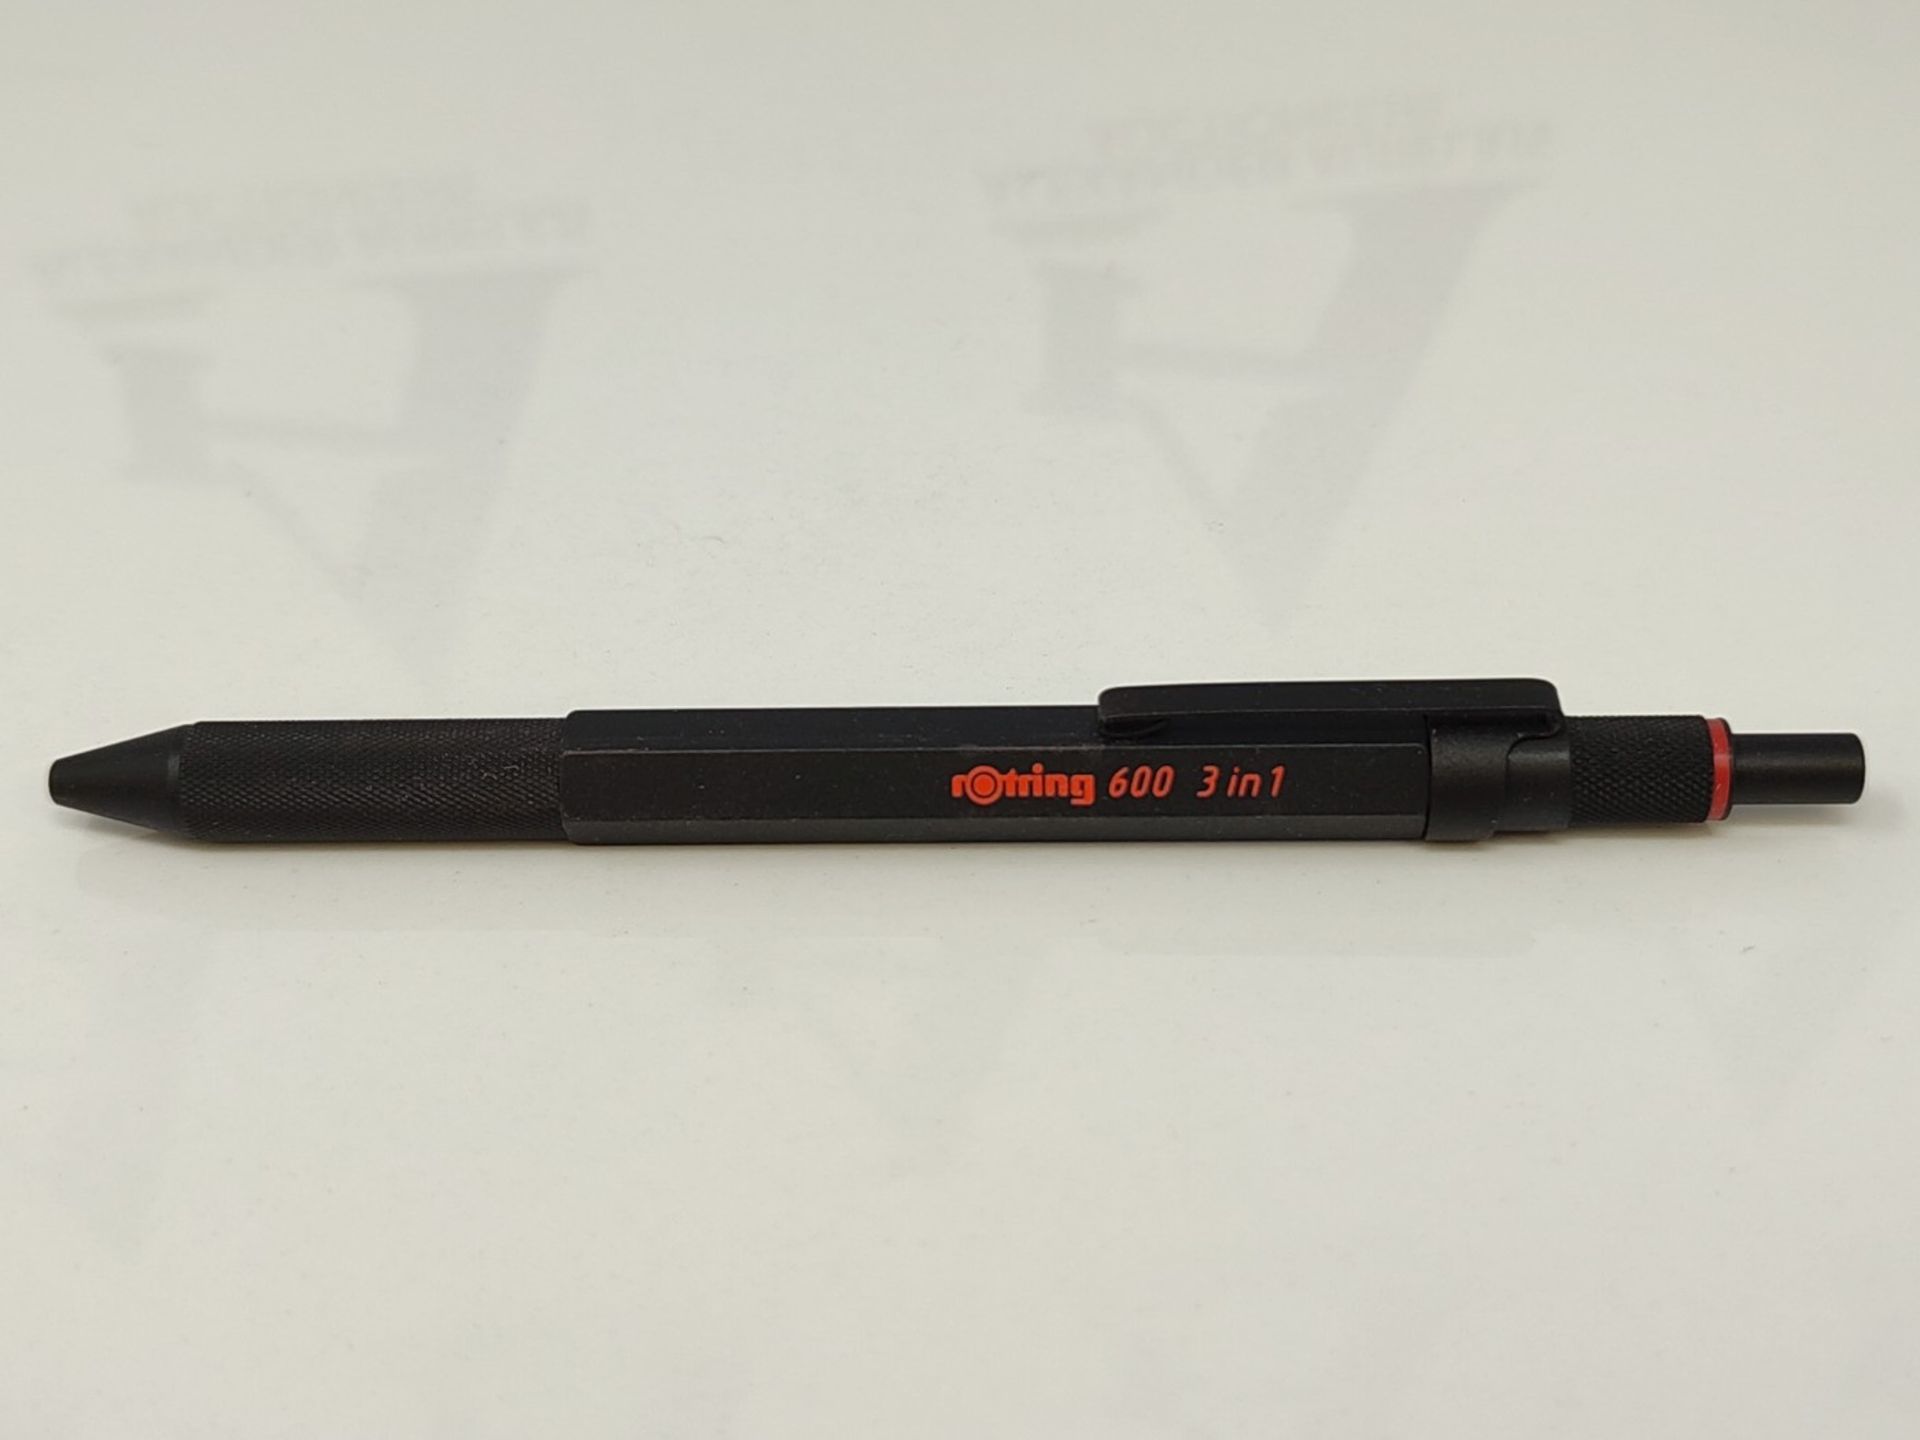 rOtring 600 Multi-colored pen and 3-in-1 mechanical pencil | 2 fine point ballpoint pe - Image 6 of 6